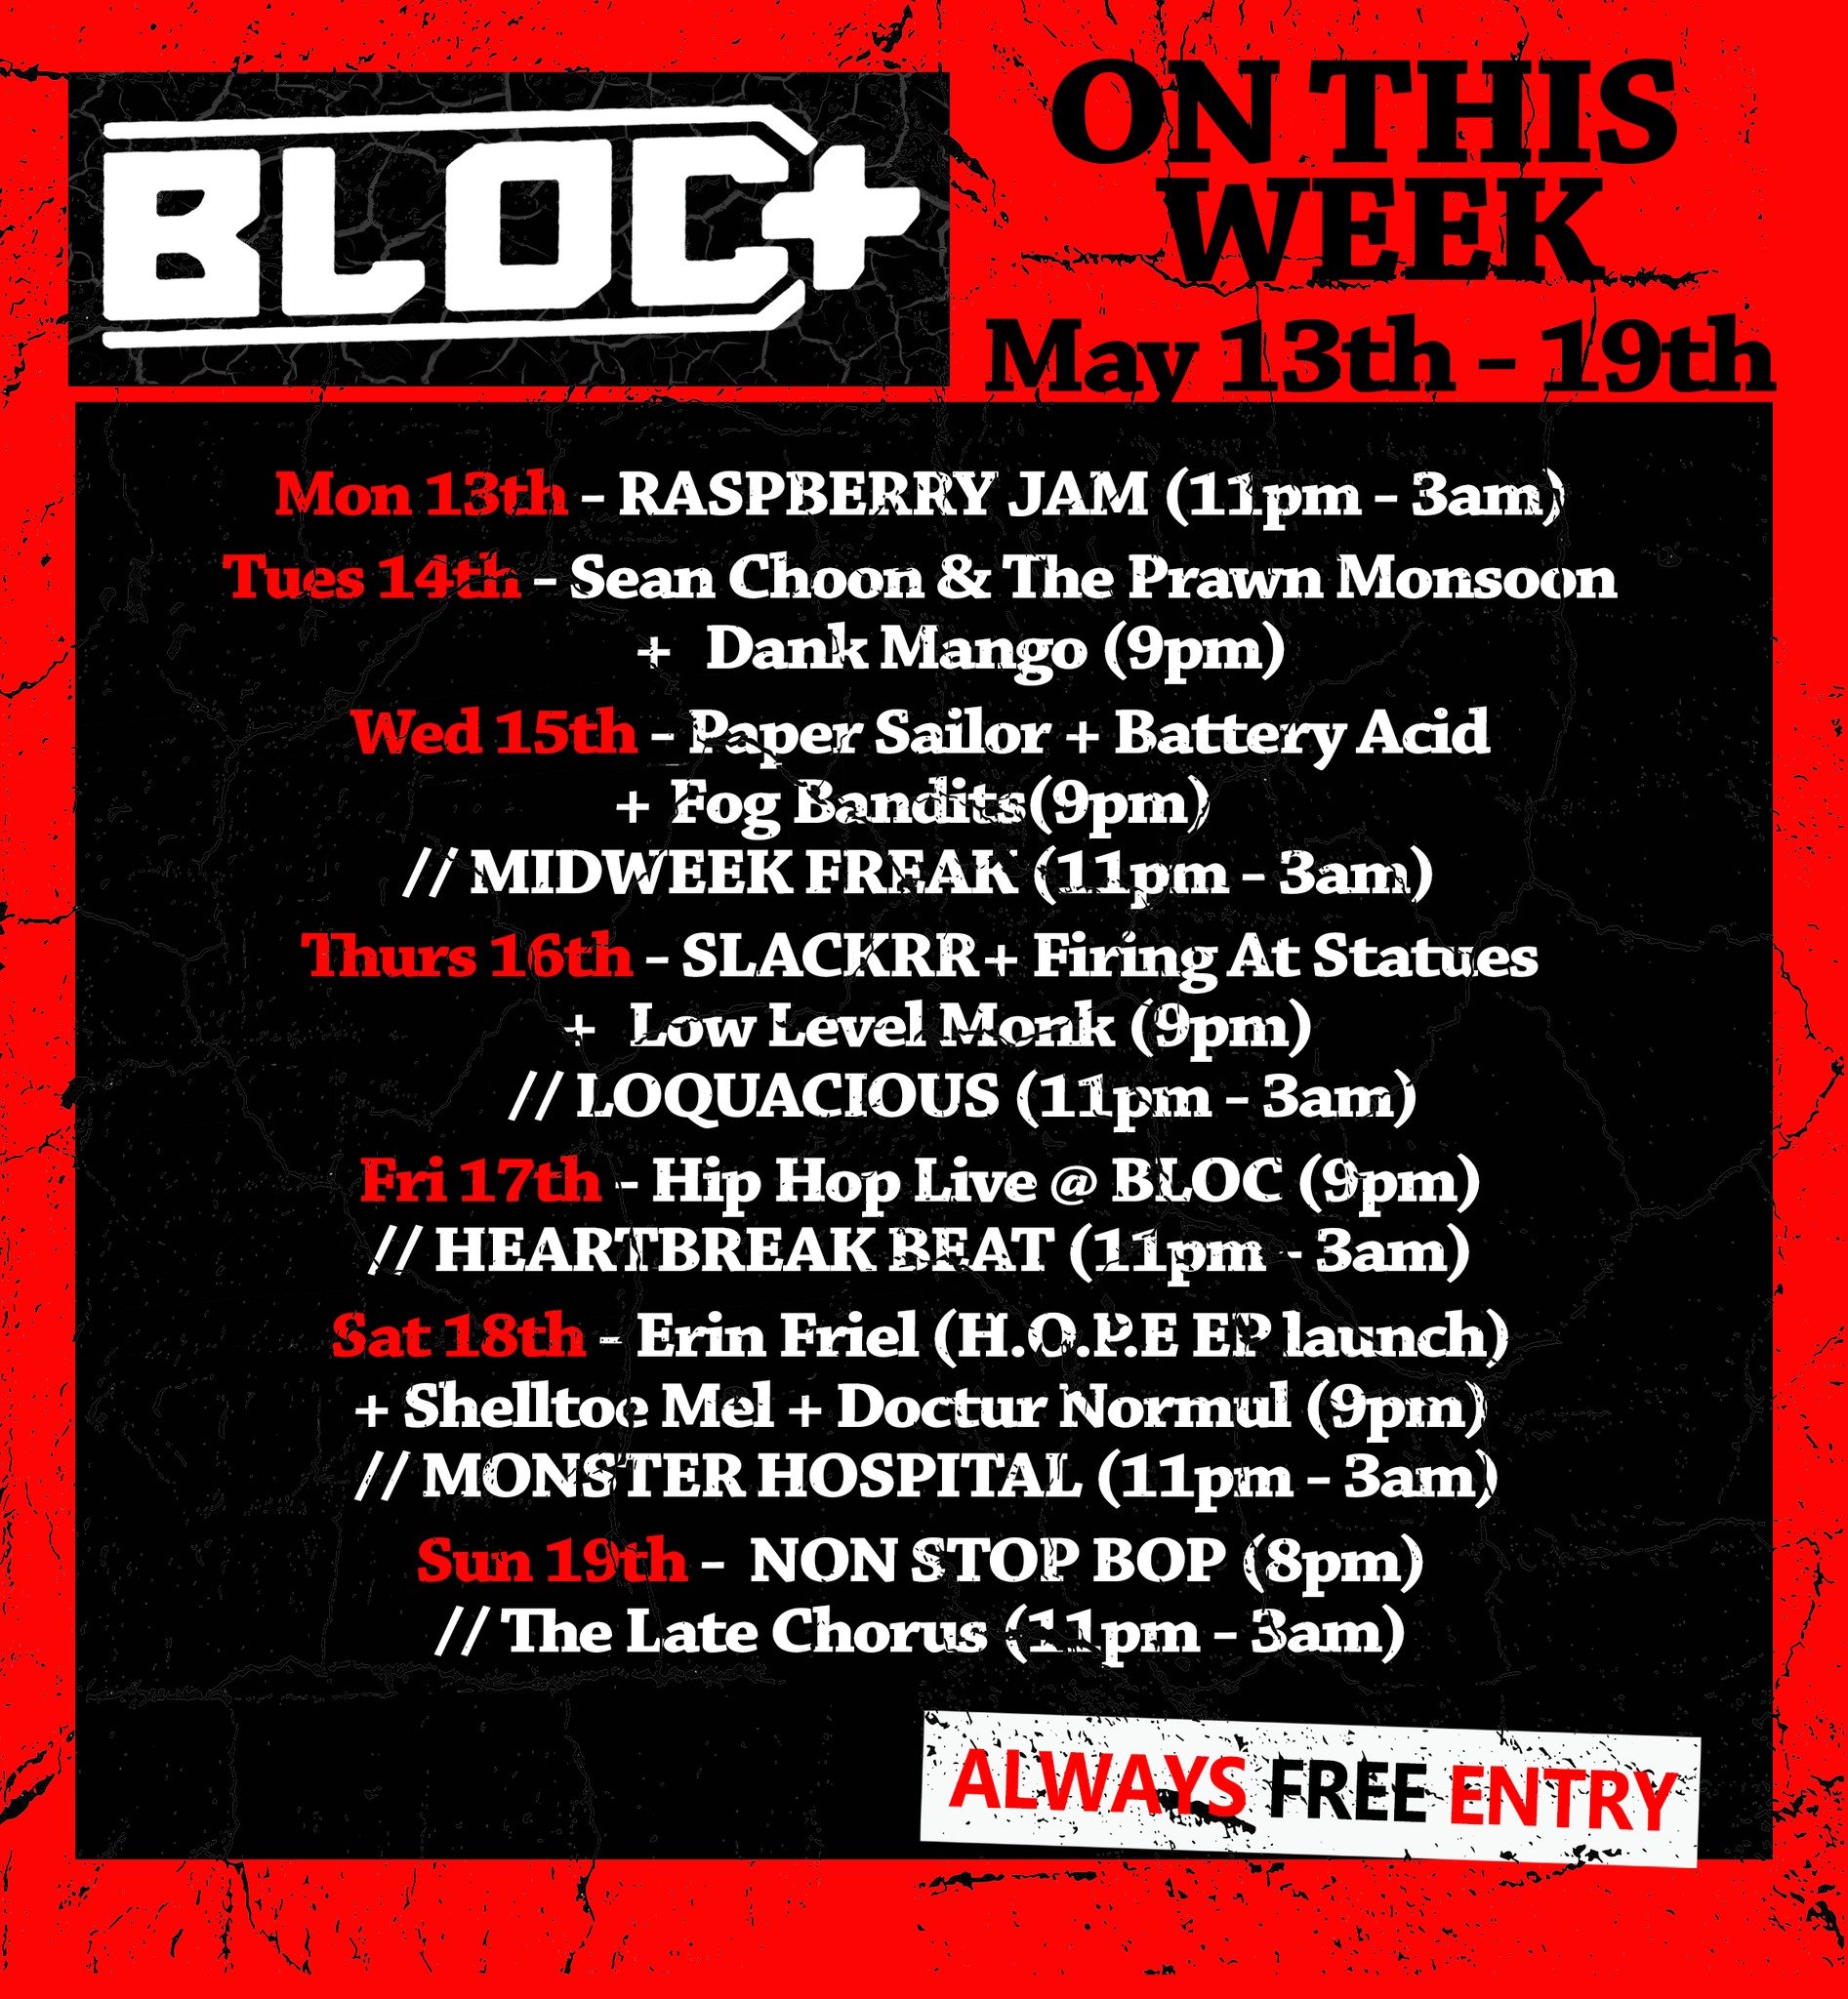 Do you have a favourite memory from Bloc+? 👀

We're bringing you an excellent lineup of live music, DJ sets, and jam nights to keep you moving all week long, don't miss out! 😎 

🎟️ ALWAYS FREE ENTRY 🎟️